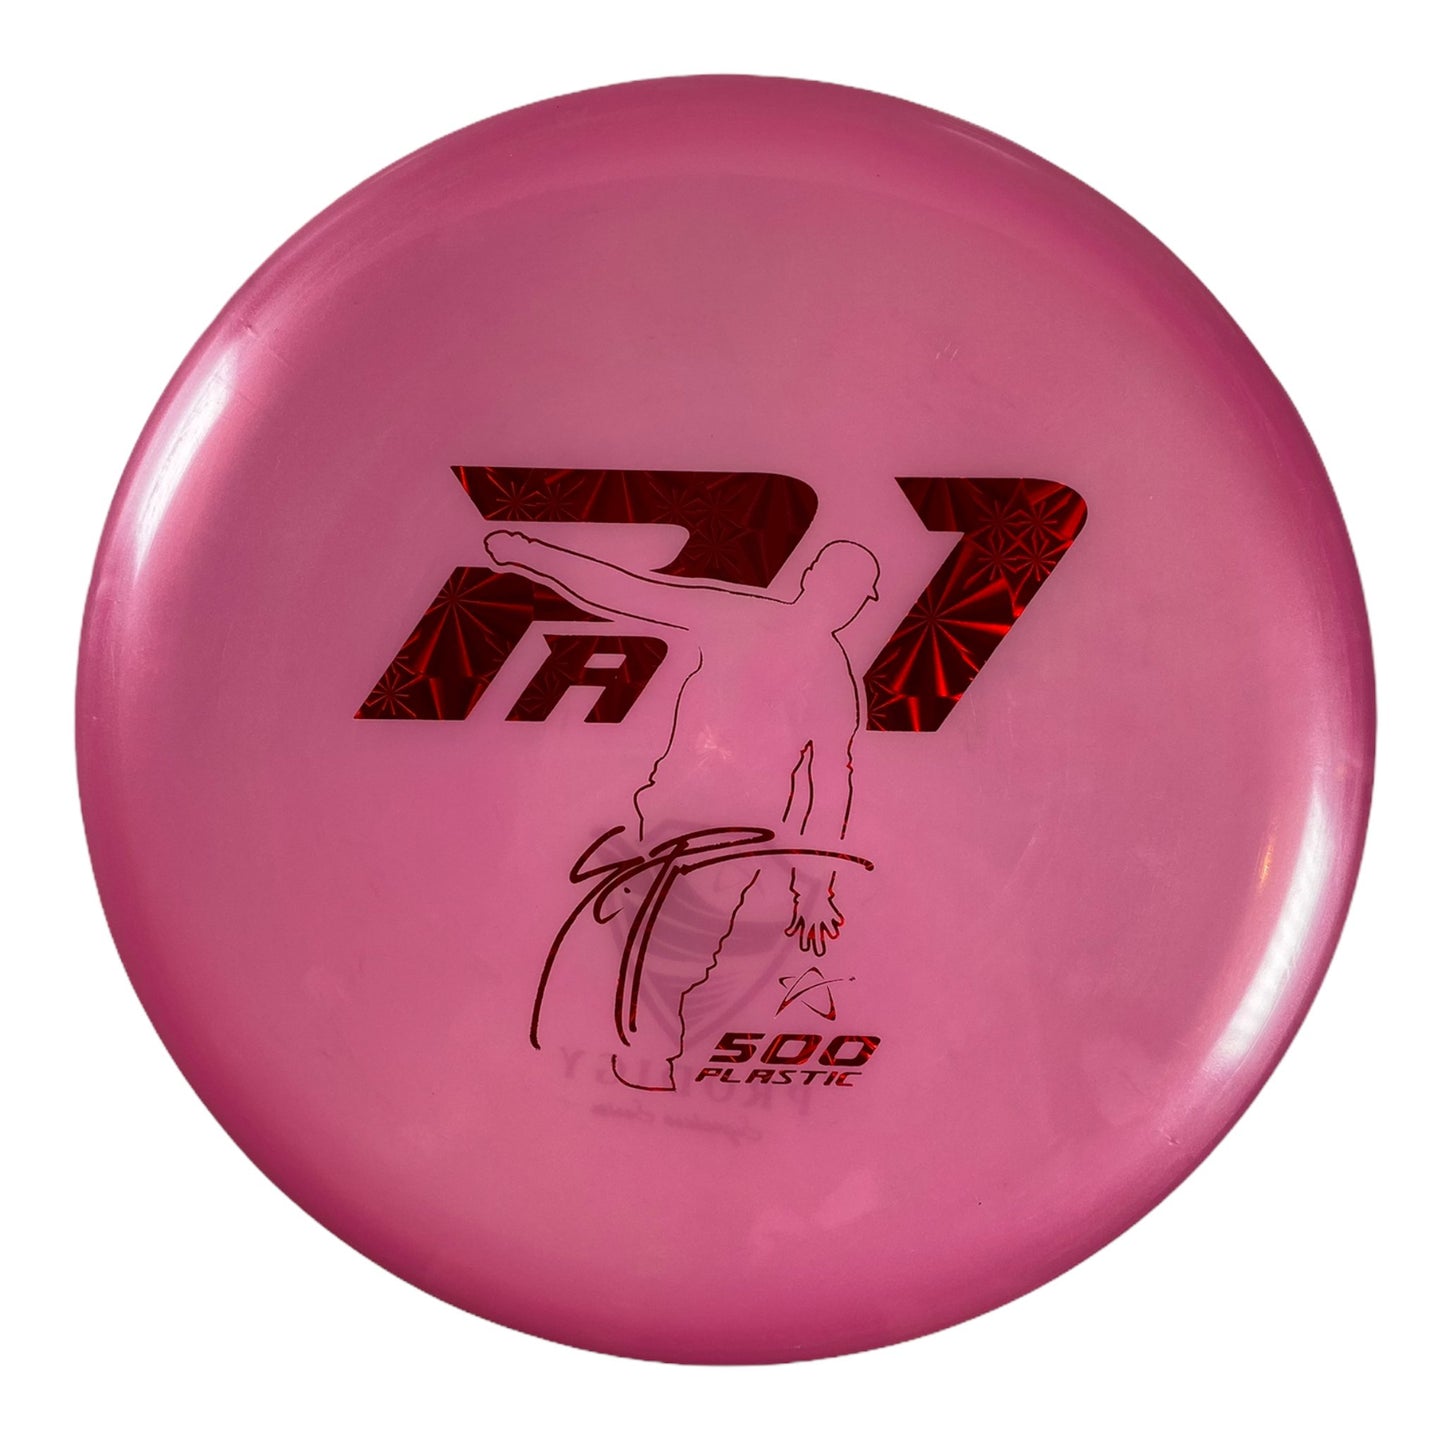 Prodigy Disc PA-1 | 500 | Pink/Red Disc Golf